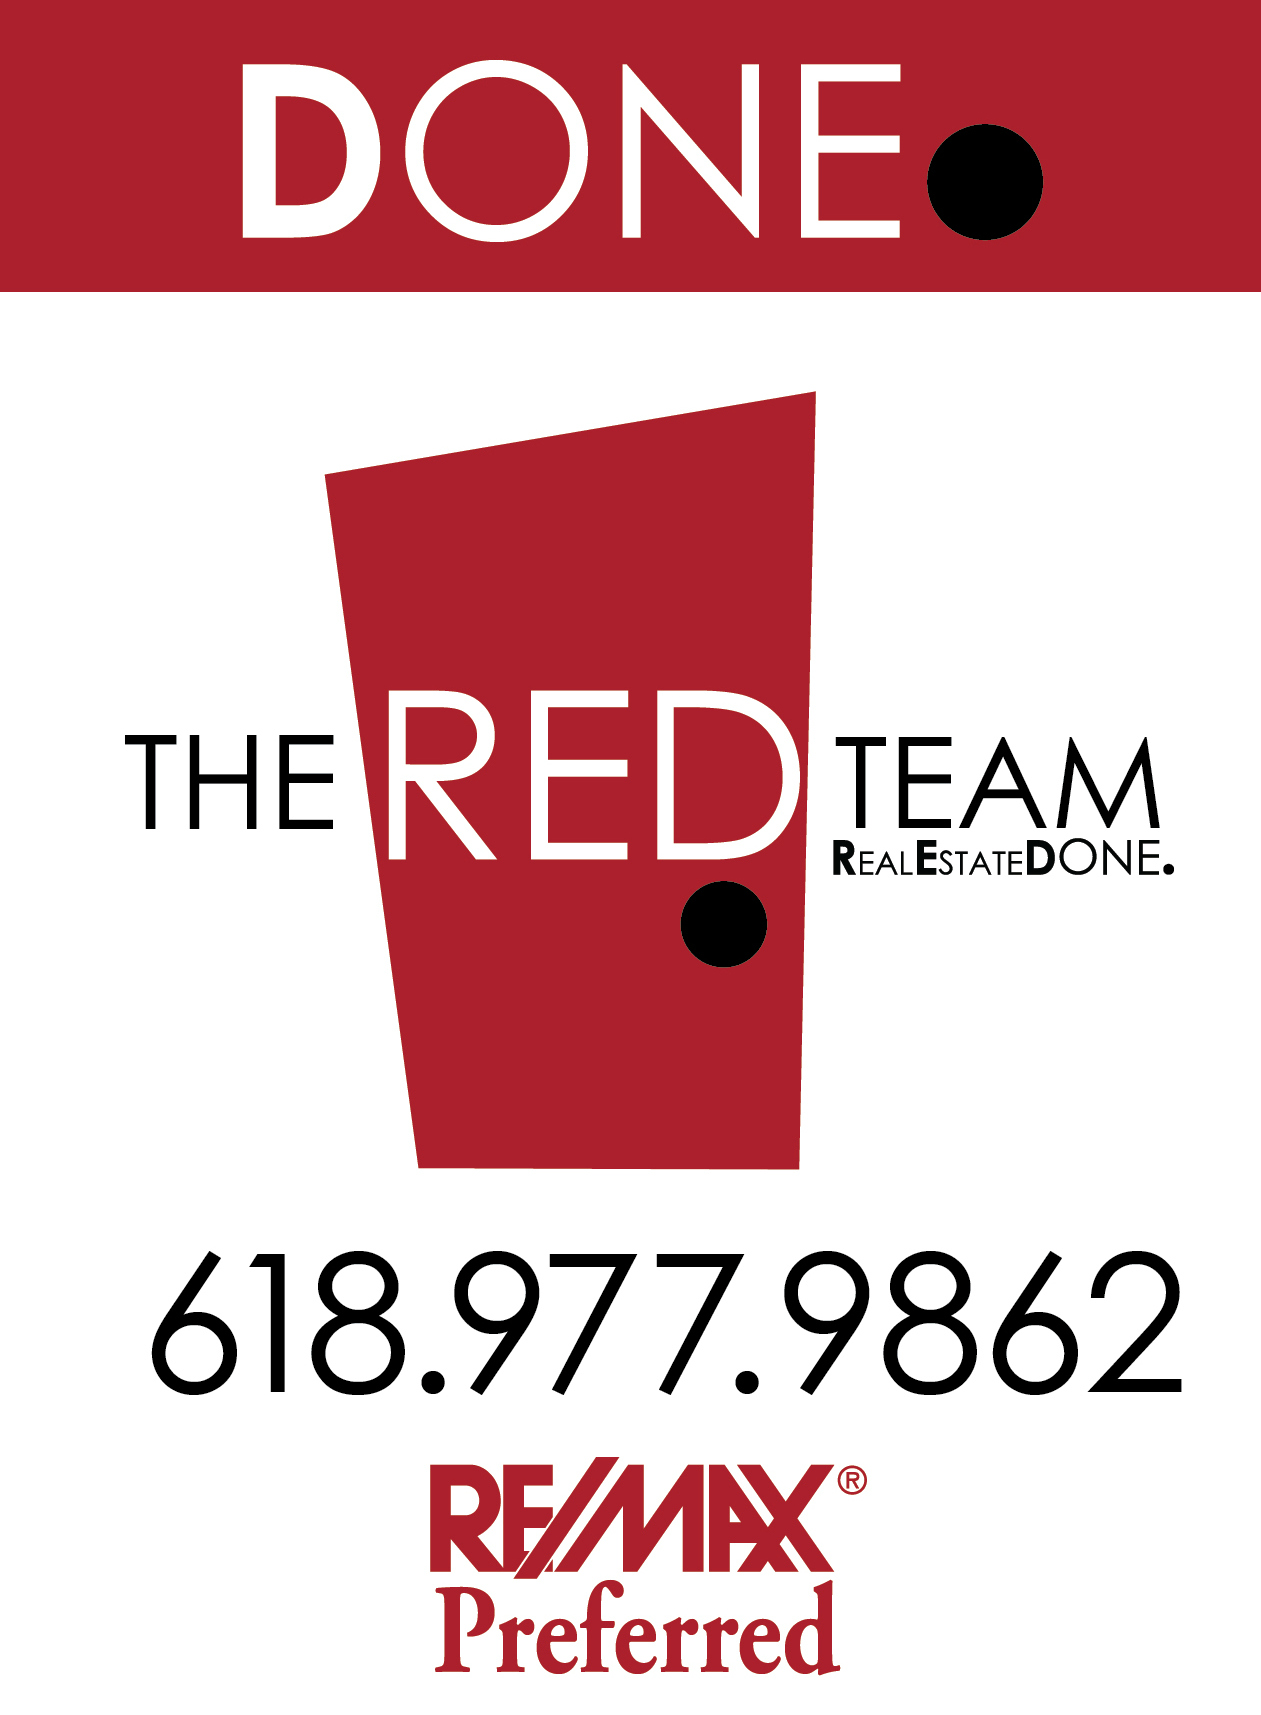 I Trust The RED Team!